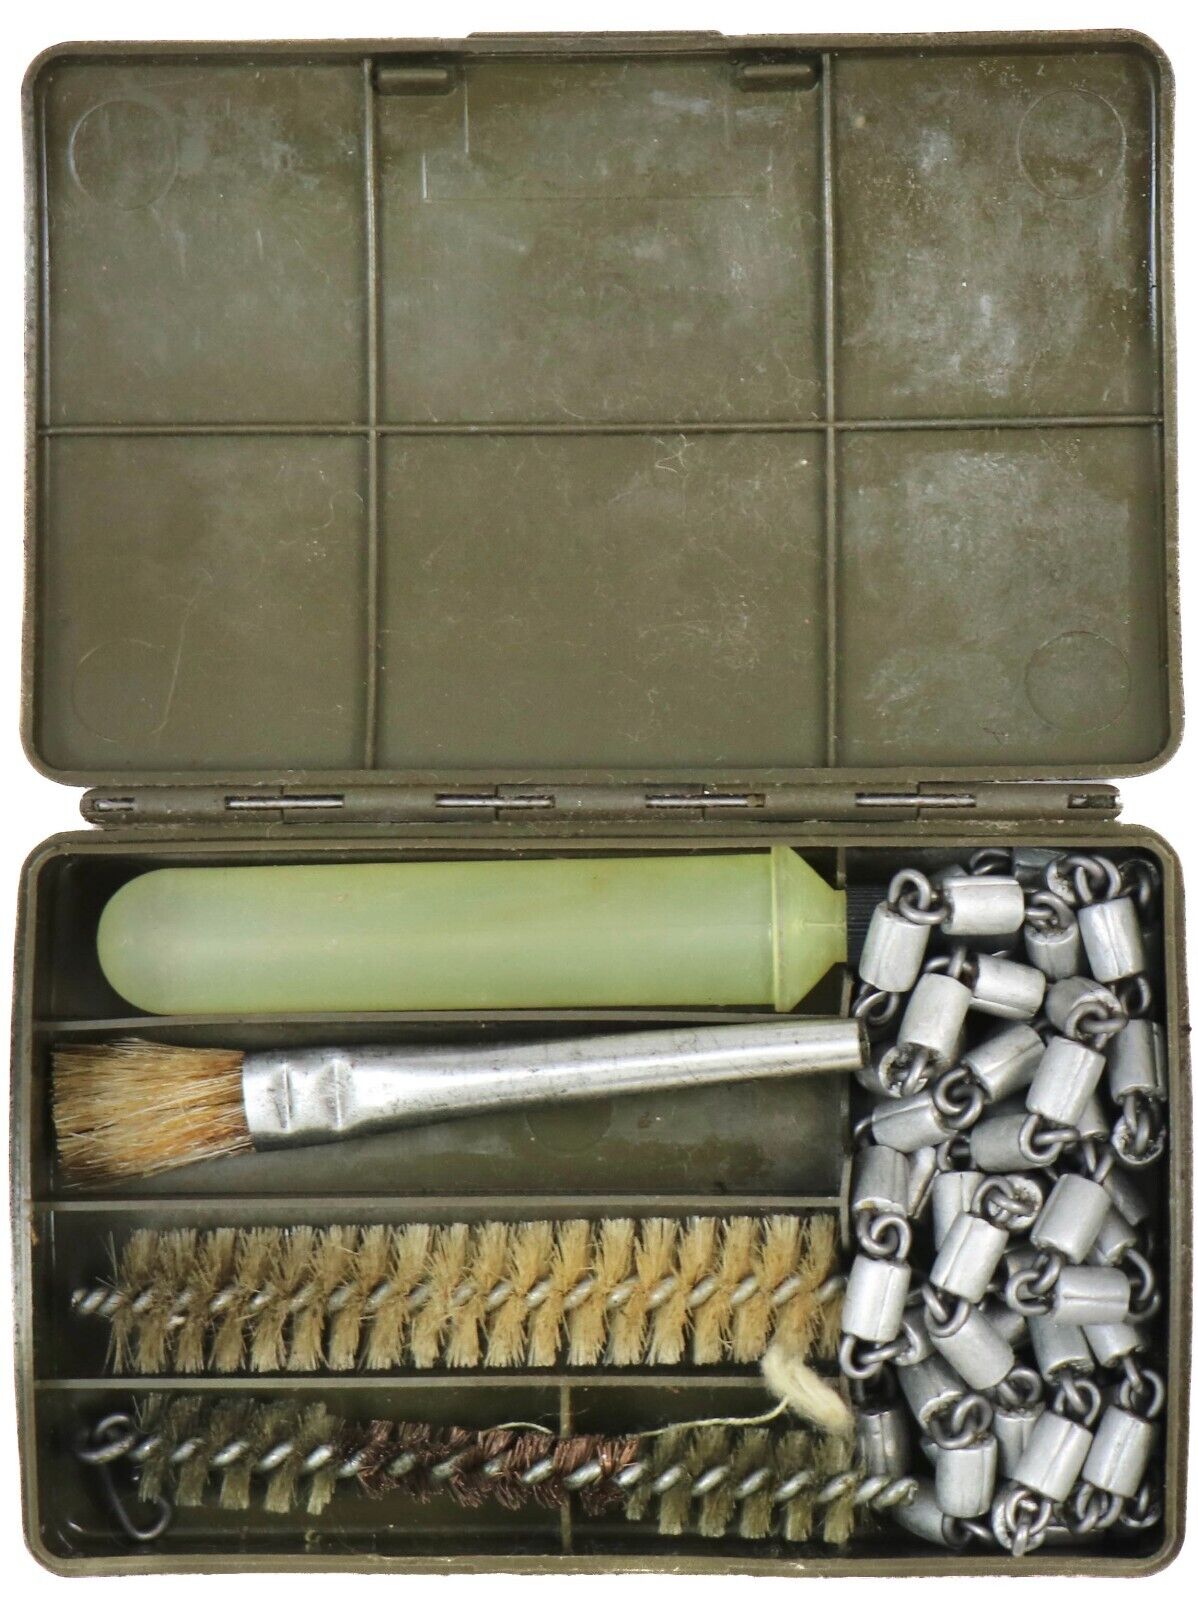 Authentic German Bundeswehr Cleaning Kit OD Green West Germany Army Military